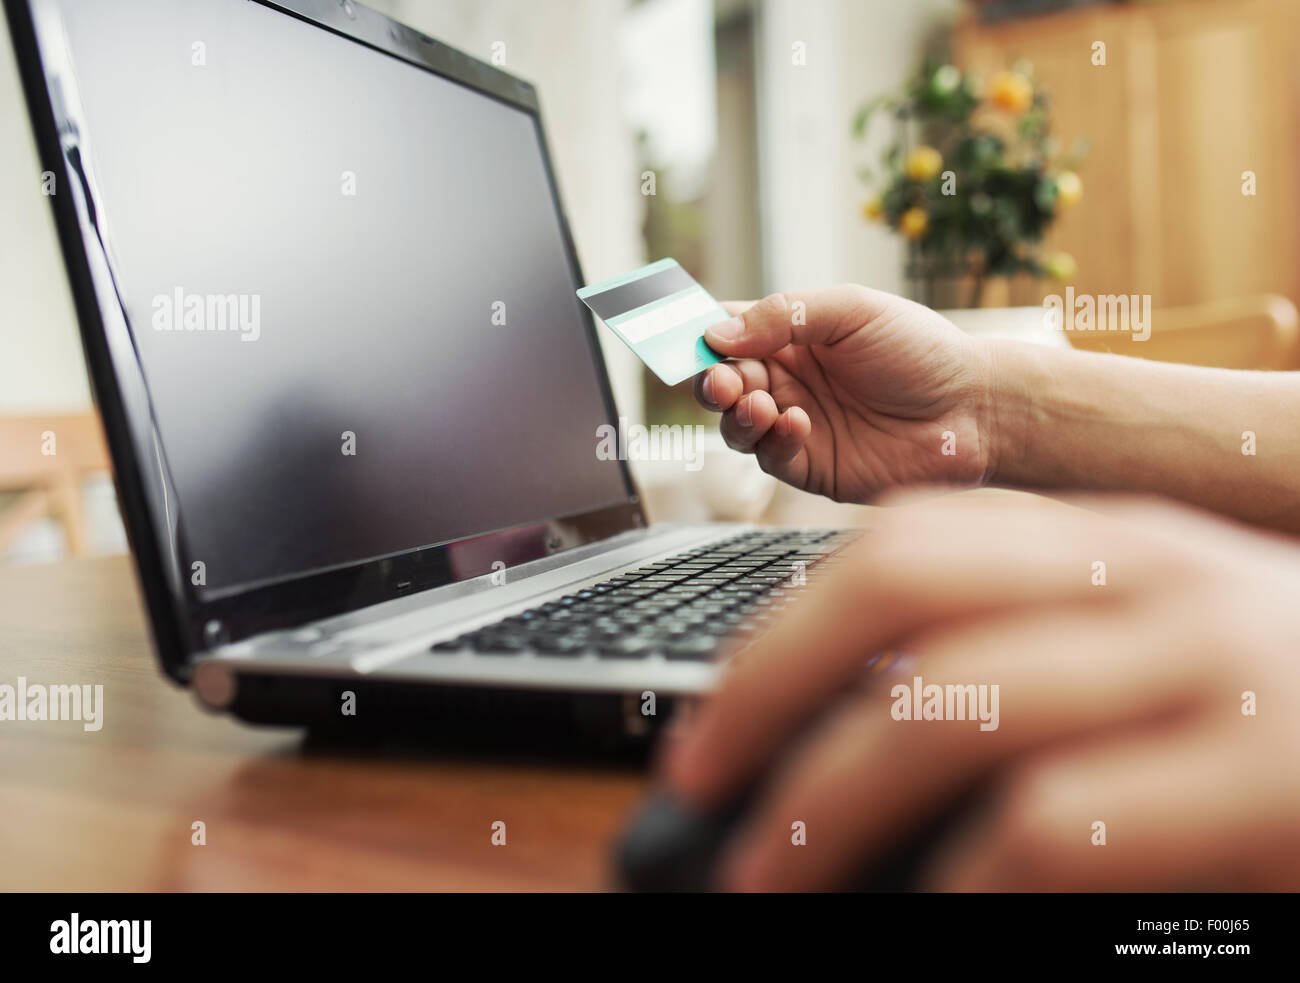 Man holding credit card in hand and entering security code using laptop keyboard Stock Photo